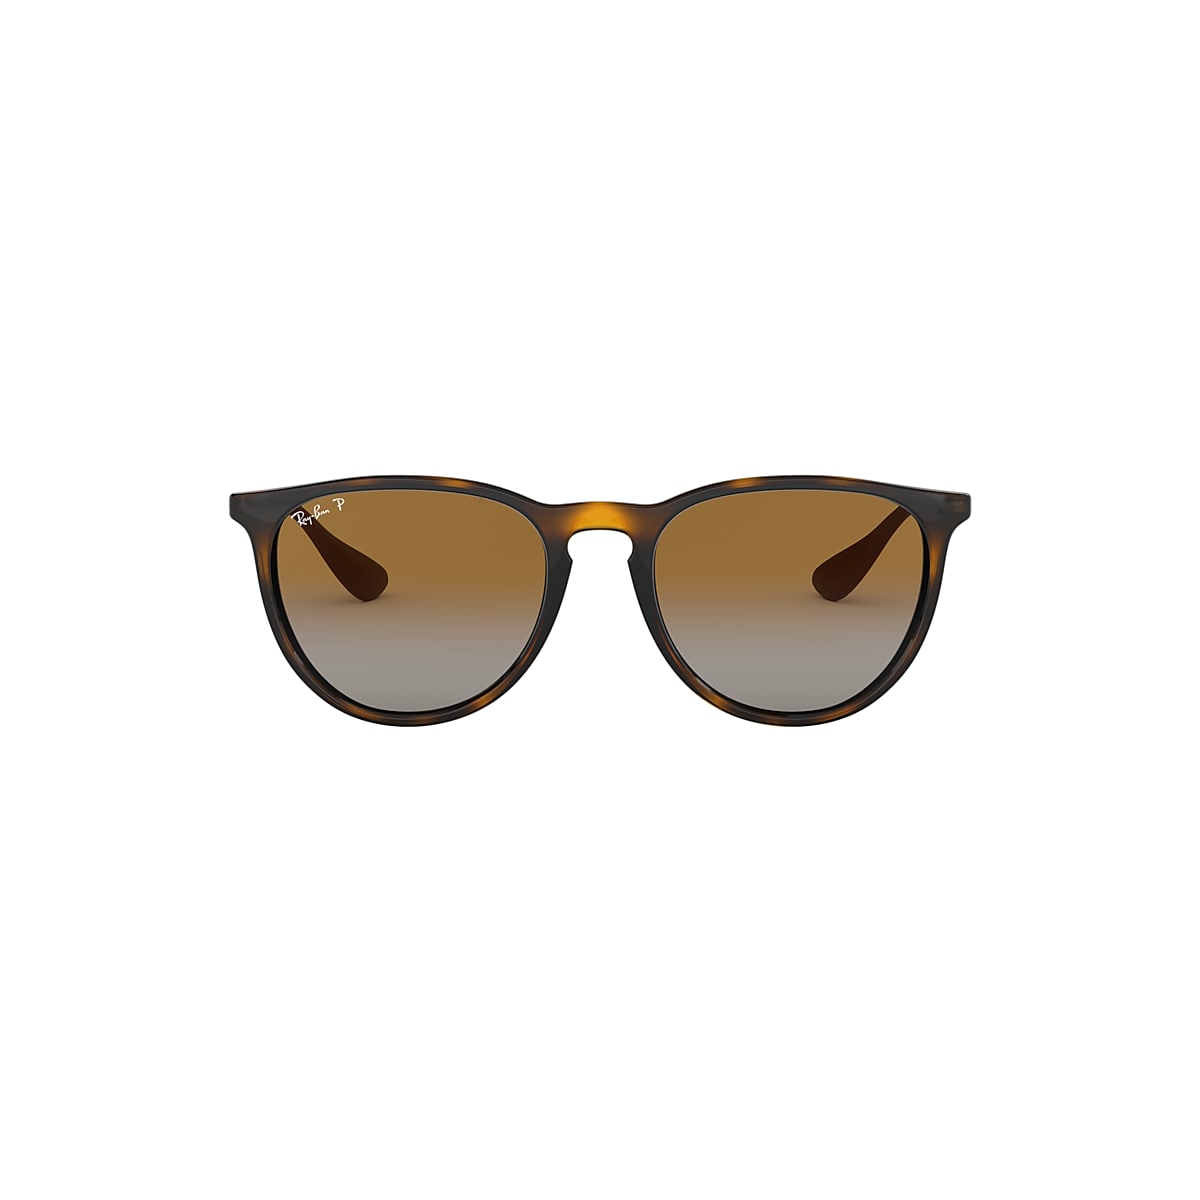 ERIKA CLASSIC Sunglasses in Light Havana and Brown - RB4171F 